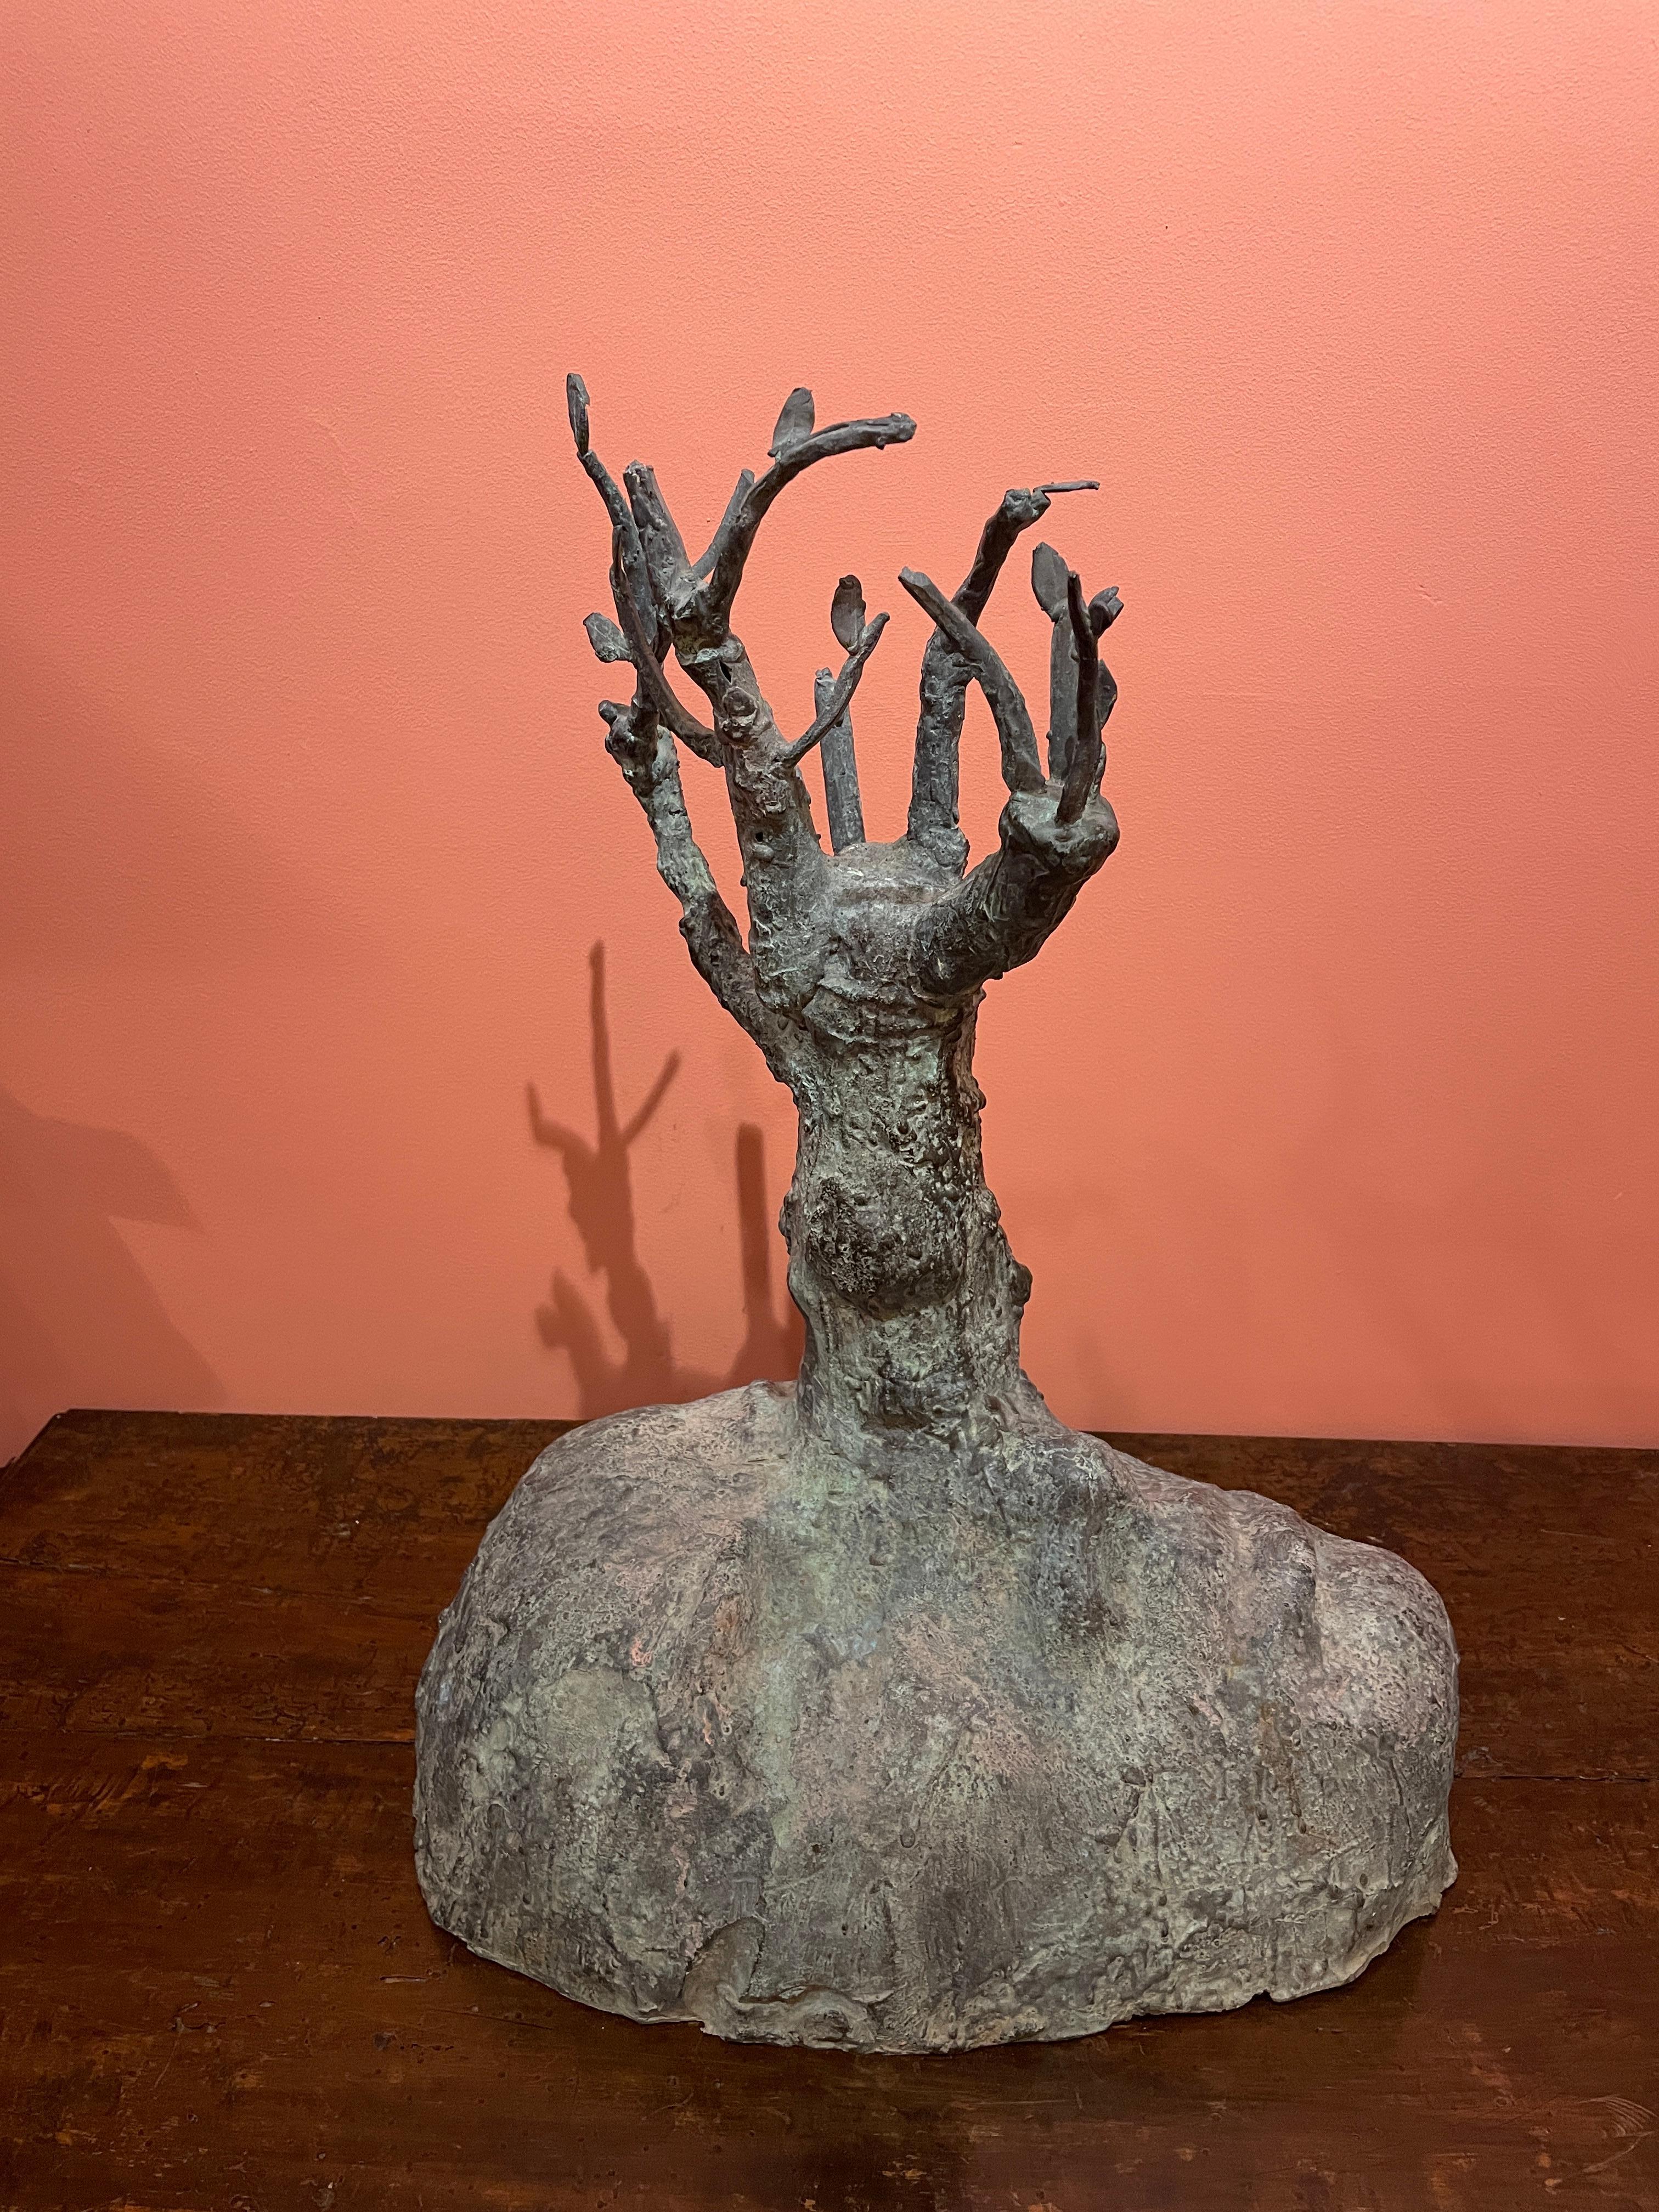 Bronze sculpture with green patina, signed.
Ivan Tilev, born in 1969 in Stara Zagora, Bulgaria, lives and works in Paris since 1991, moved to Provins in 2002.

1983-1988. Diploma from the National School of Decorative Arts in Sofia,